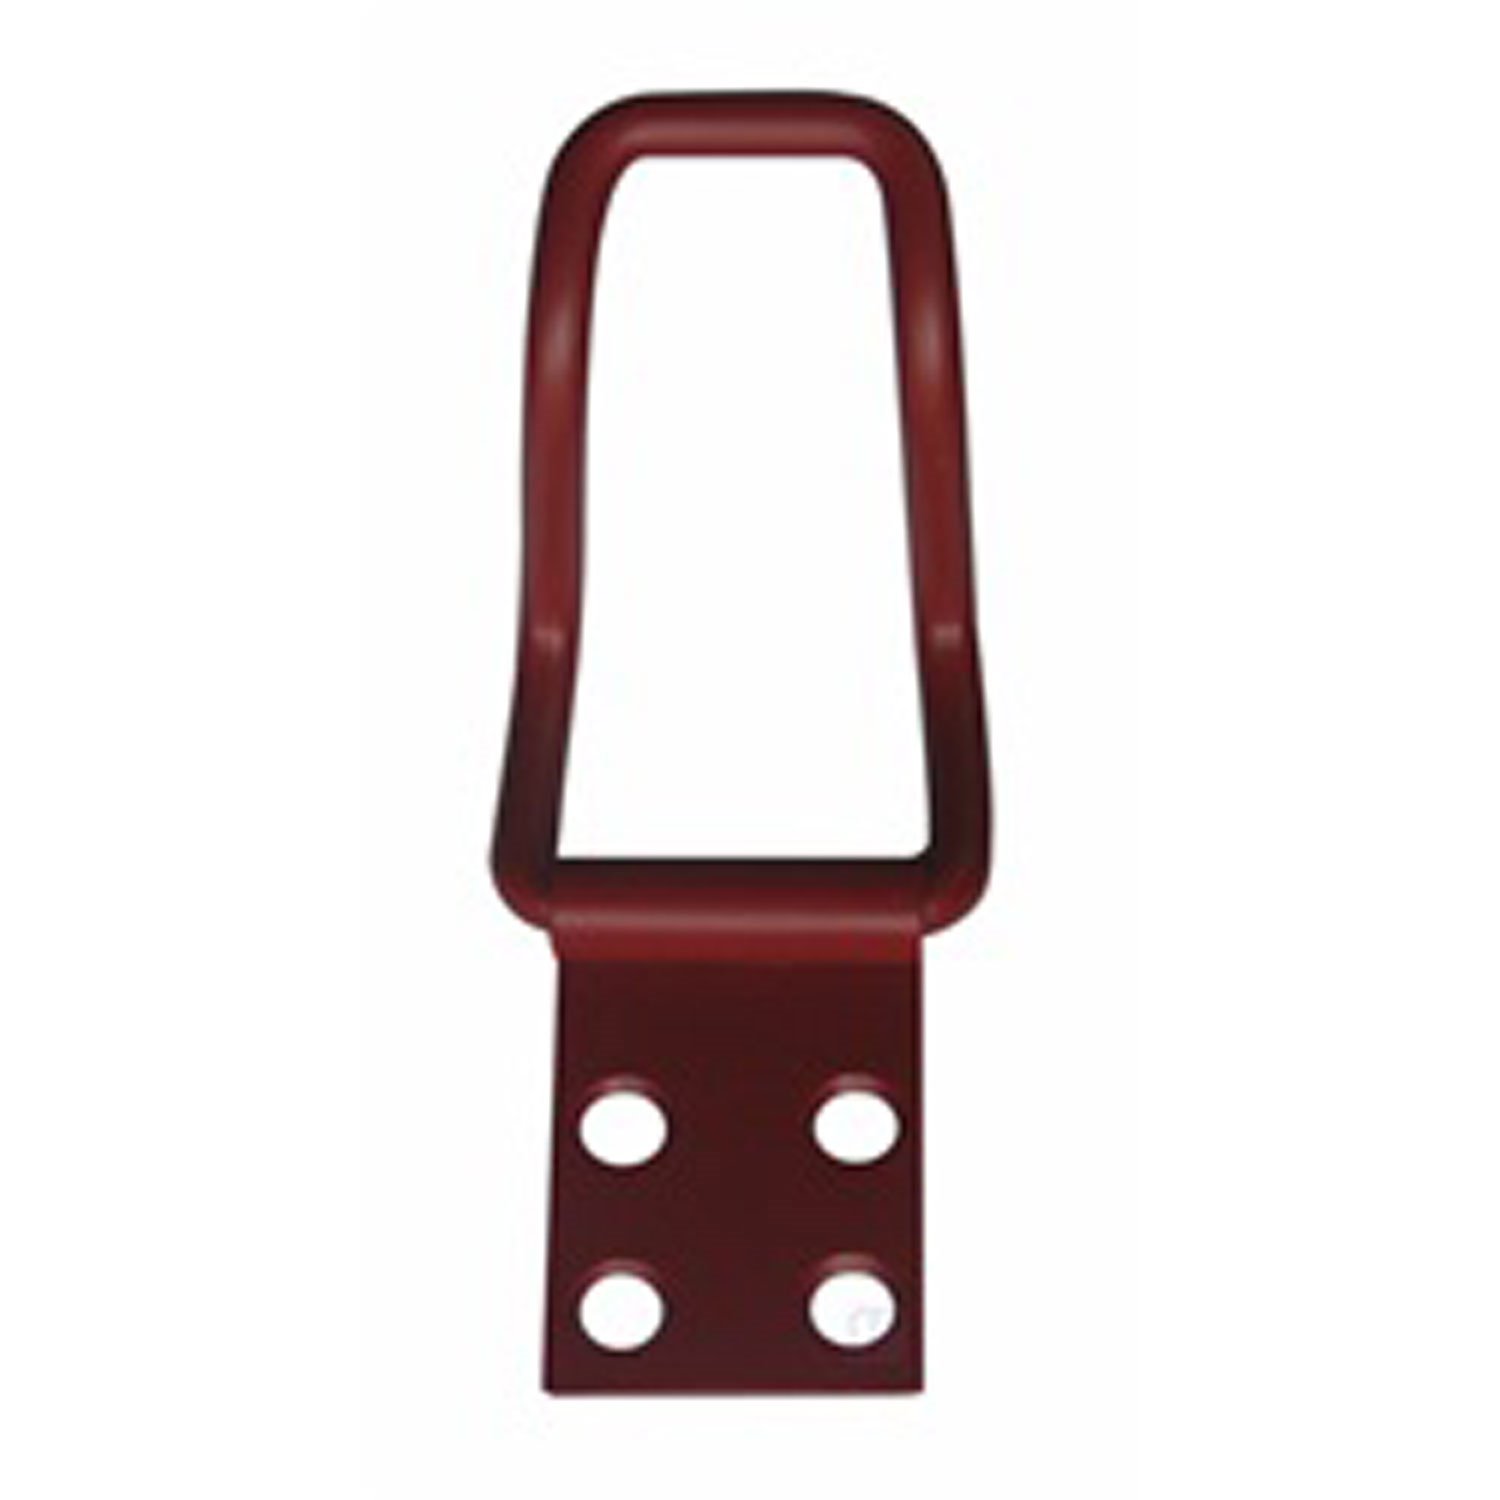 This reproduction rear axe clamp from Omix-ADA fits 41-45 Willys MB and Ford GPW.